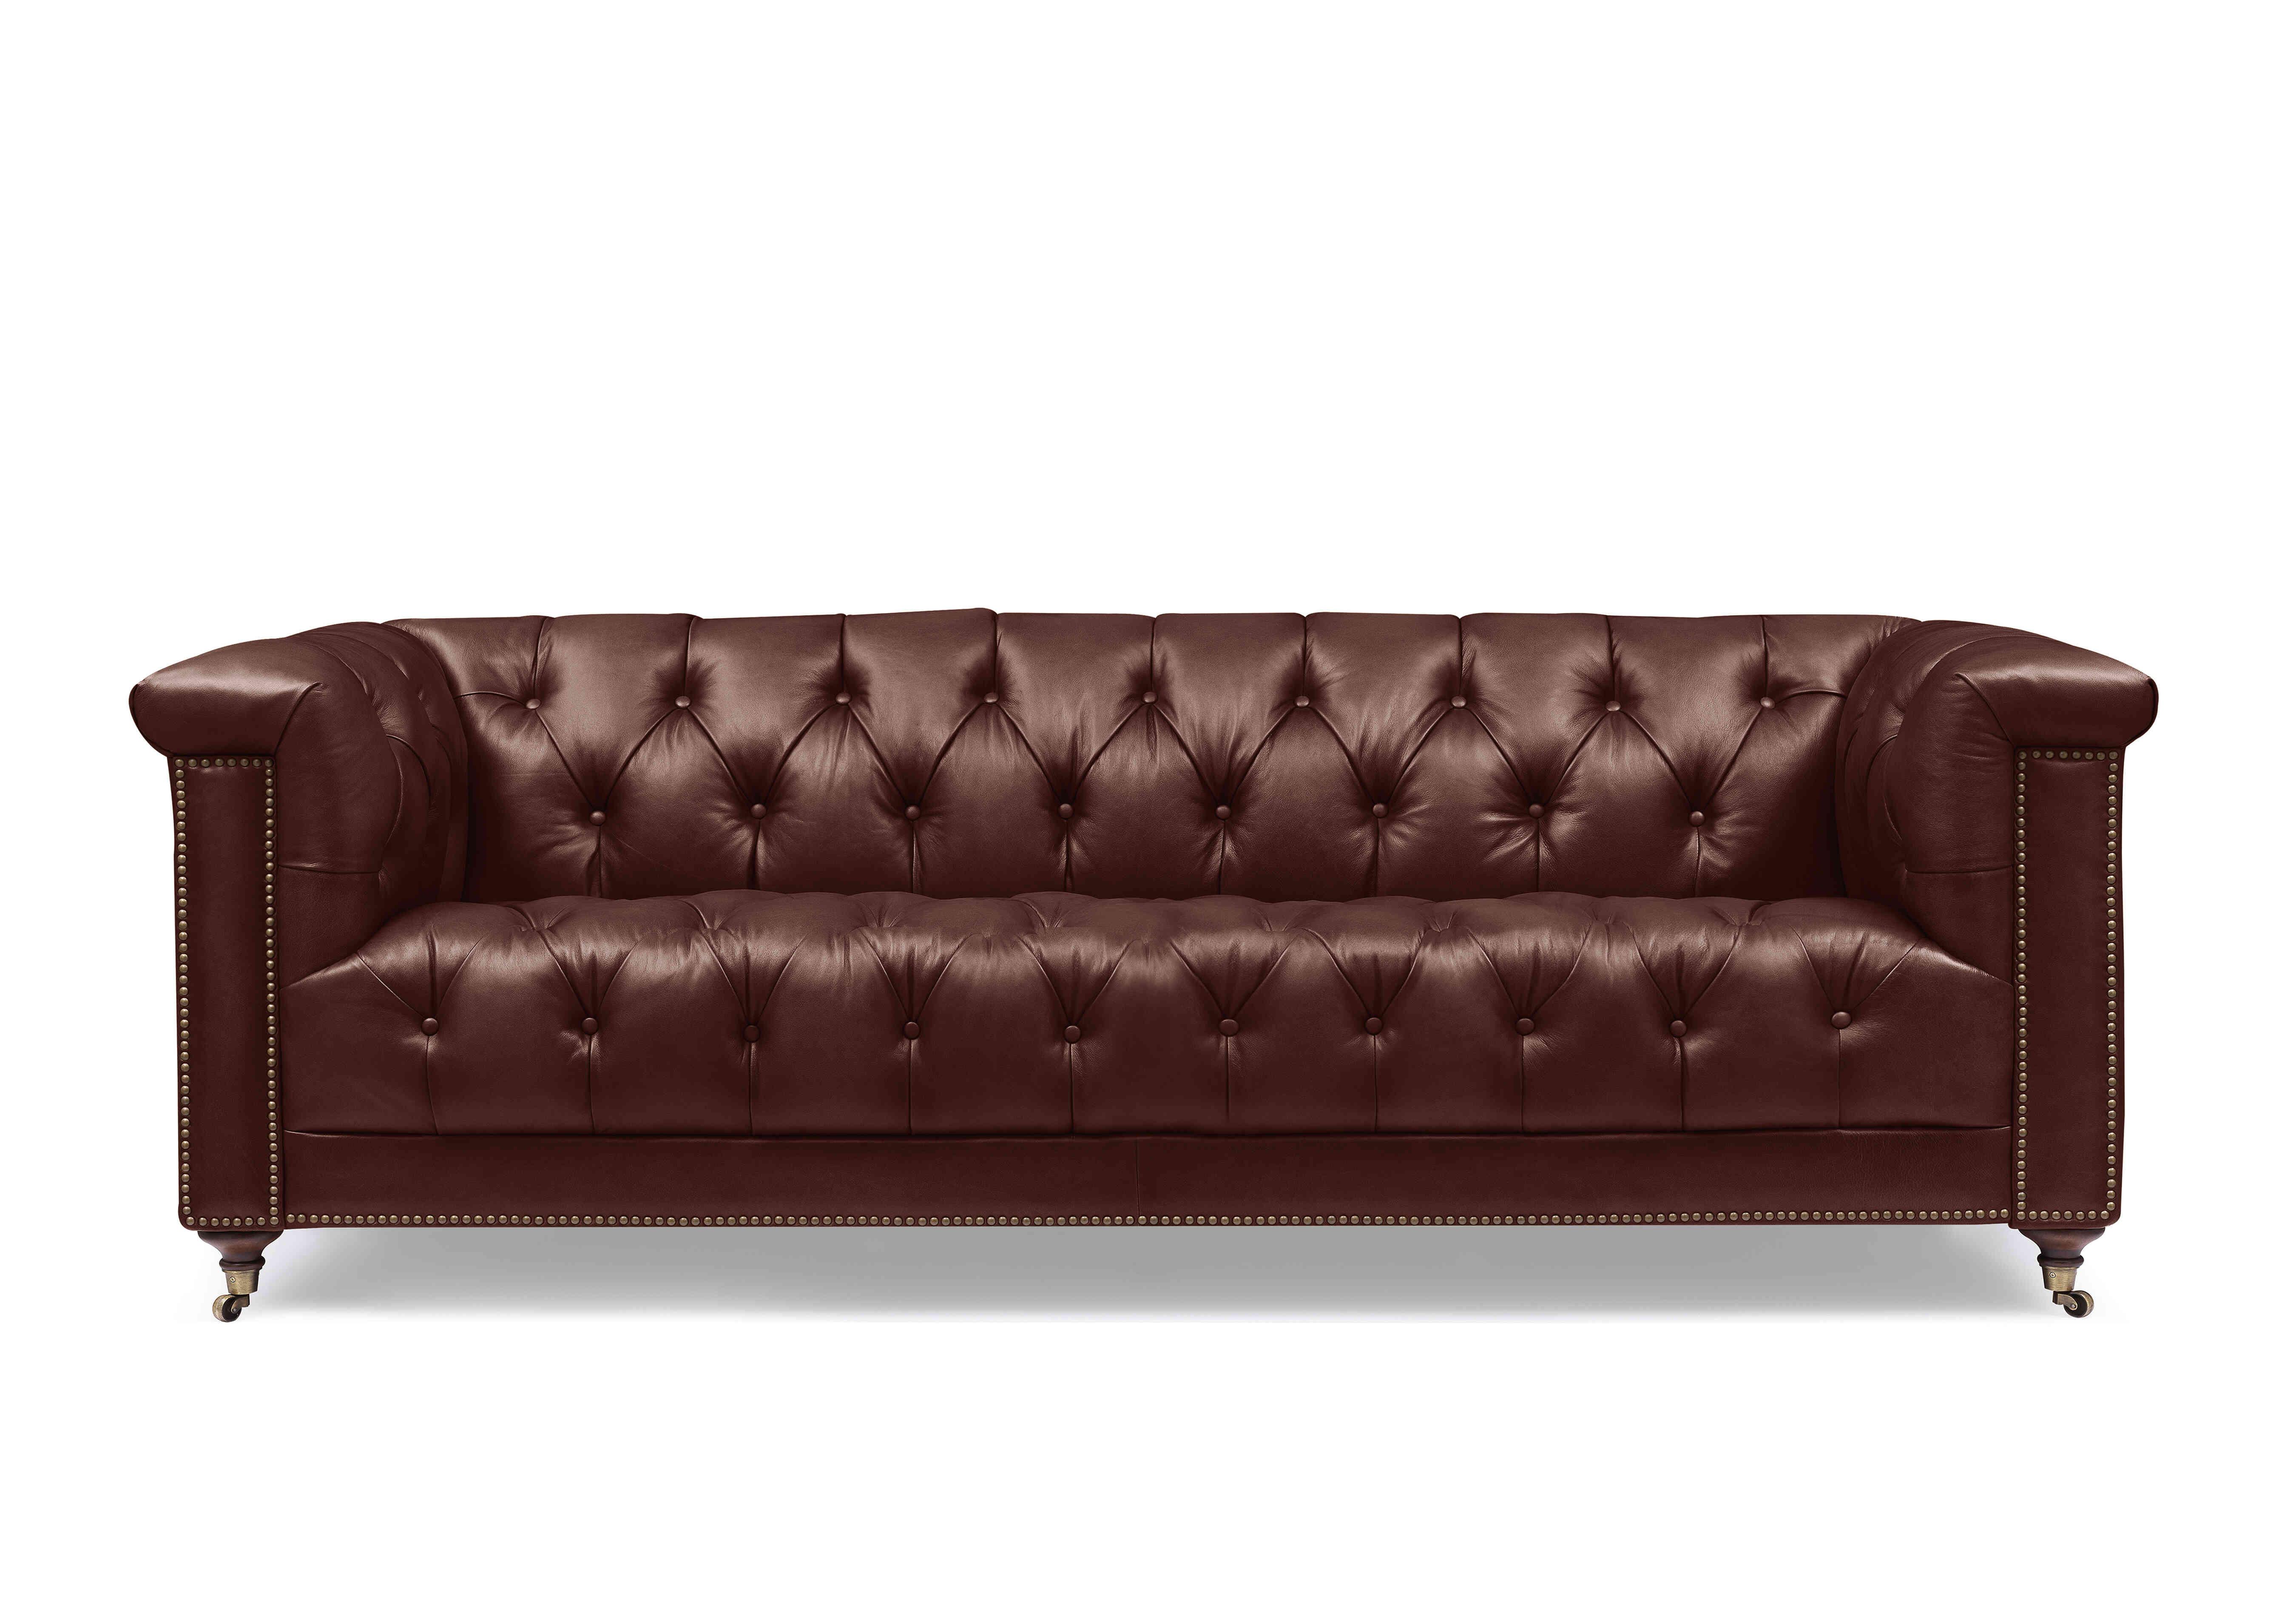 Wallace 4 Seater Leather Chesterfield Sofa with USB-C in X3y1-1964ls Merlot on Furniture Village